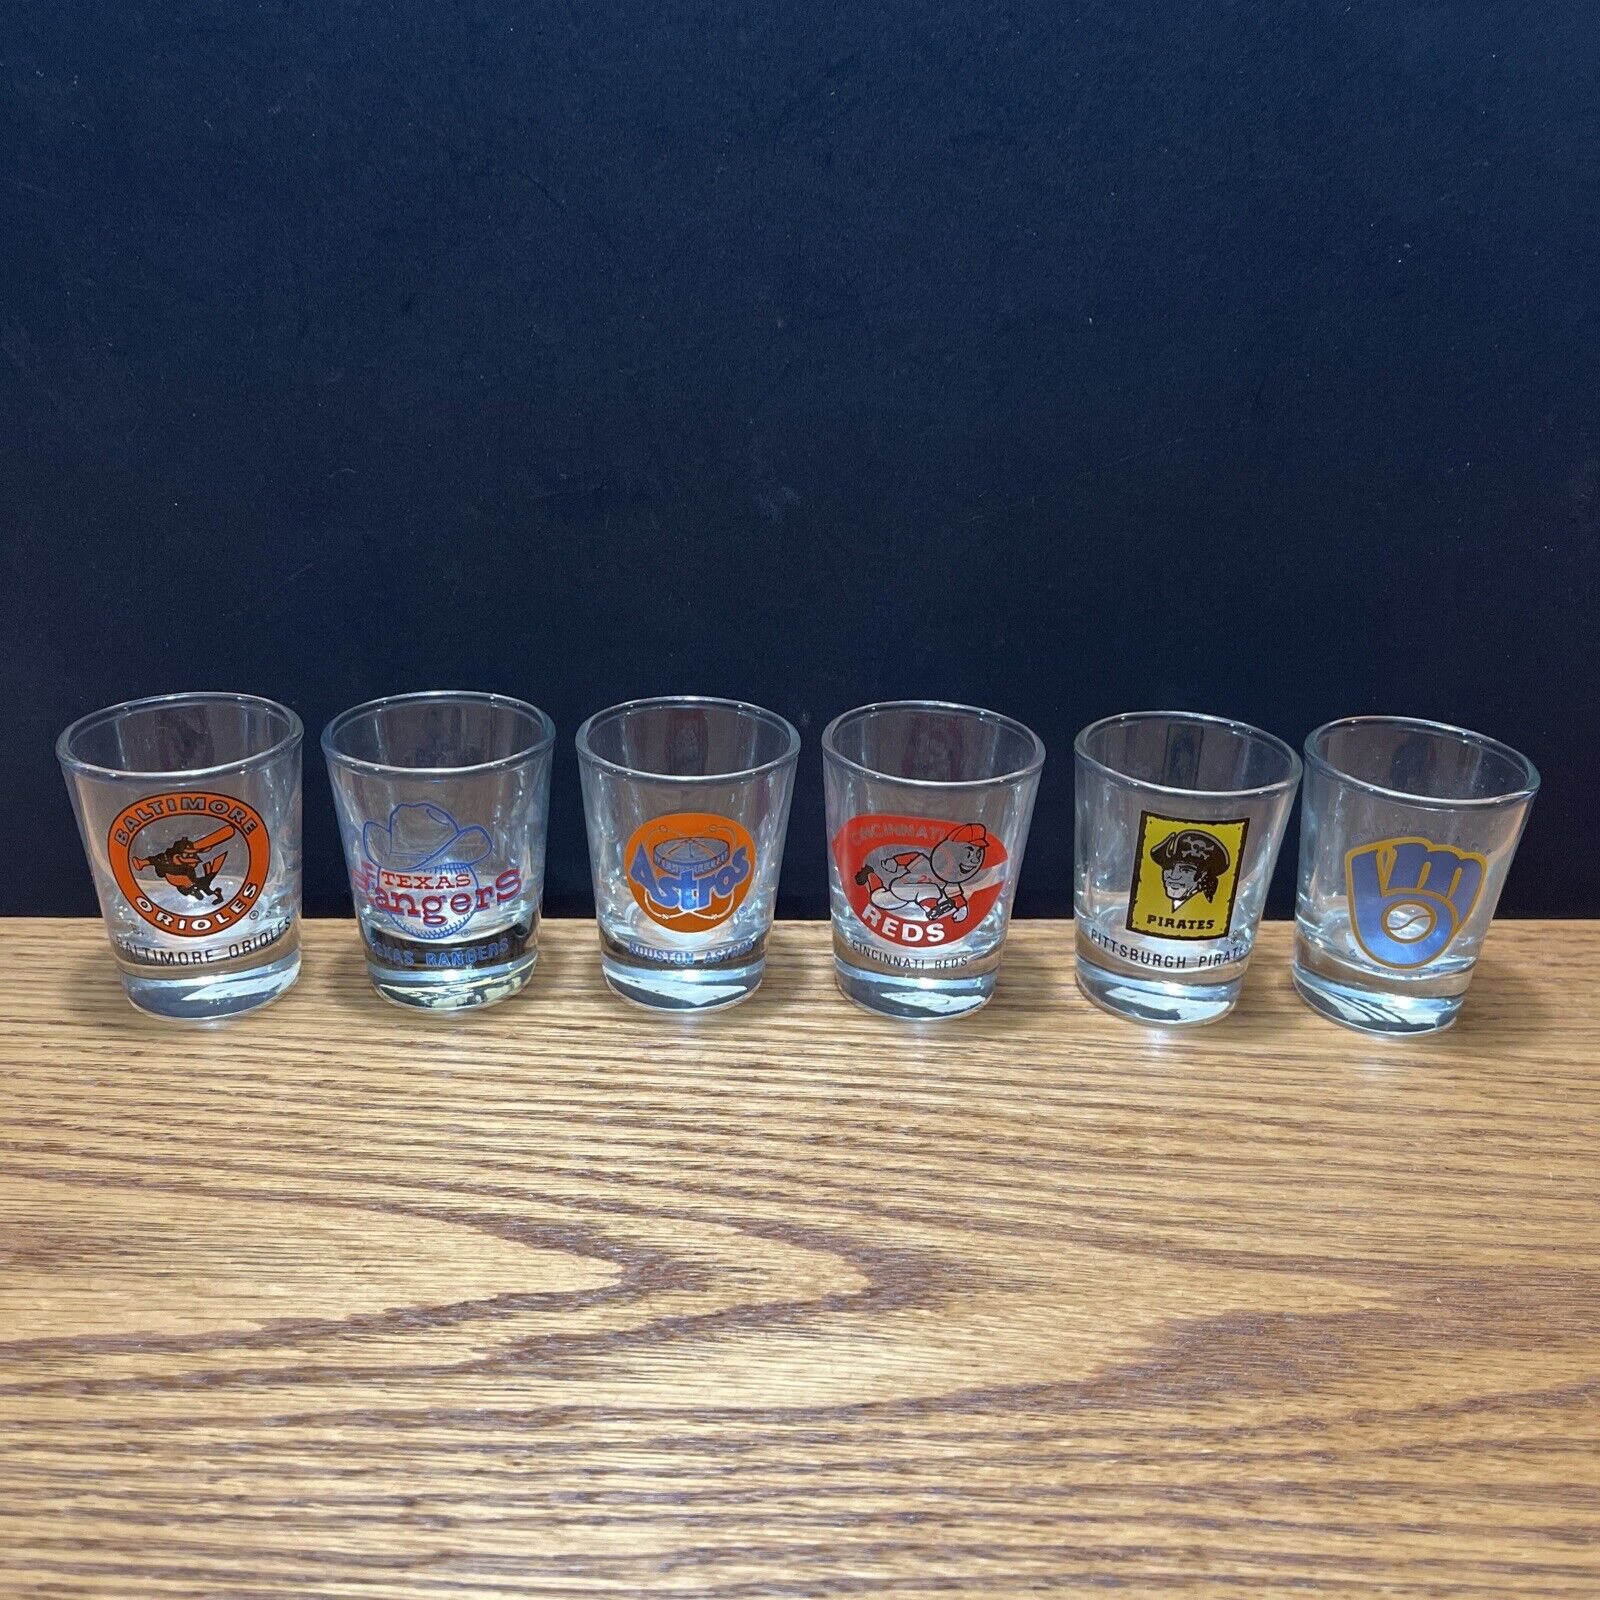 6 Vintage Baseball Shot Glasses Orioles, Rangers, Reds, Pirates, Brewers